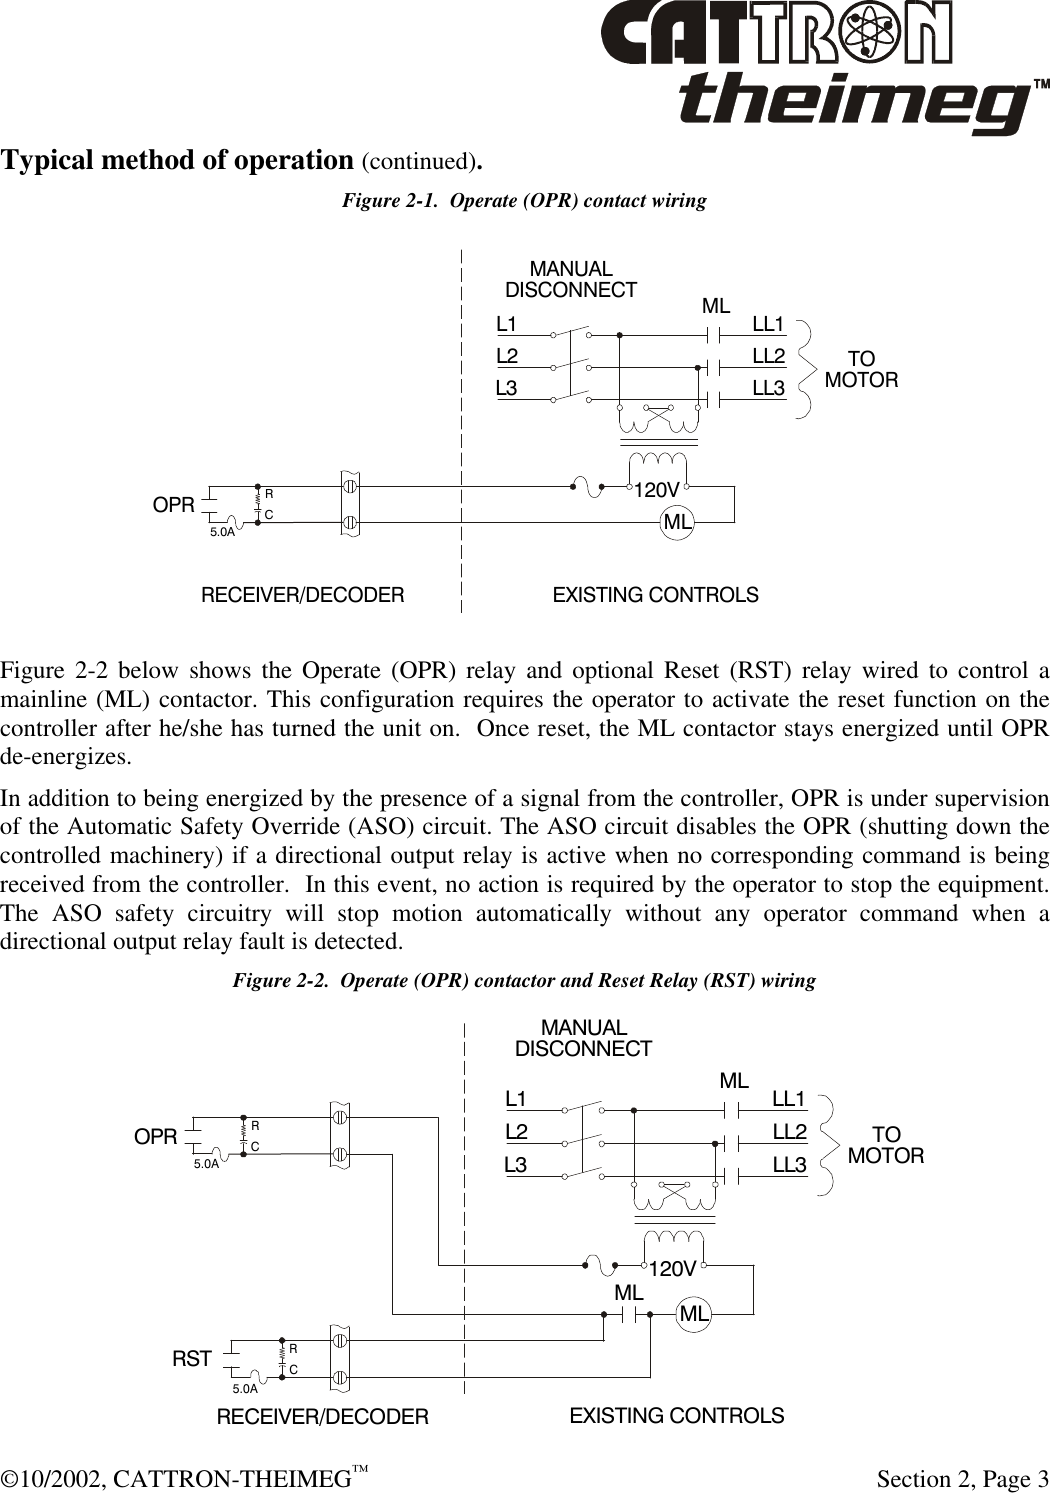  ©10/2002, CATTRON-THEIMEG™   Section 2, Page 3 Typical method of operation (continued).  Figure 2-1.  Operate (OPR) contact wiring   Figure 2-2 below shows the Operate (OPR) relay and optional Reset (RST) relay wired to control a mainline (ML) contactor. This configuration requires the operator to activate the reset function on the controller after he/she has turned the unit on.  Once reset, the ML contactor stays energized until OPR de-energizes.  In addition to being energized by the presence of a signal from the controller, OPR is under supervision of the Automatic Safety Override (ASO) circuit. The ASO circuit disables the OPR (shutting down the controlled machinery) if a directional output relay is active when no corresponding command is being received from the controller.  In this event, no action is required by the operator to stop the equipment. The ASO safety circuitry will stop motion automatically without any operator command when a directional output relay fault is detected. Figure 2-2.  Operate (OPR) contactor and Reset Relay (RST) wiring  120VL1 MLMLMANUALDISCONNECTL2L3 LL1LL2LL3 TOMOTORRECEIVER/DECODEREXISTING CONTROLS OPRRC5.0AOPR120VRSTRRCC5.0A5.0AL1MLMLMLMANUALDISCONNECTL2L3 LL1LL2LL3 TOMOTORRECEIVER/DECODEREXISTING CONTROLS 